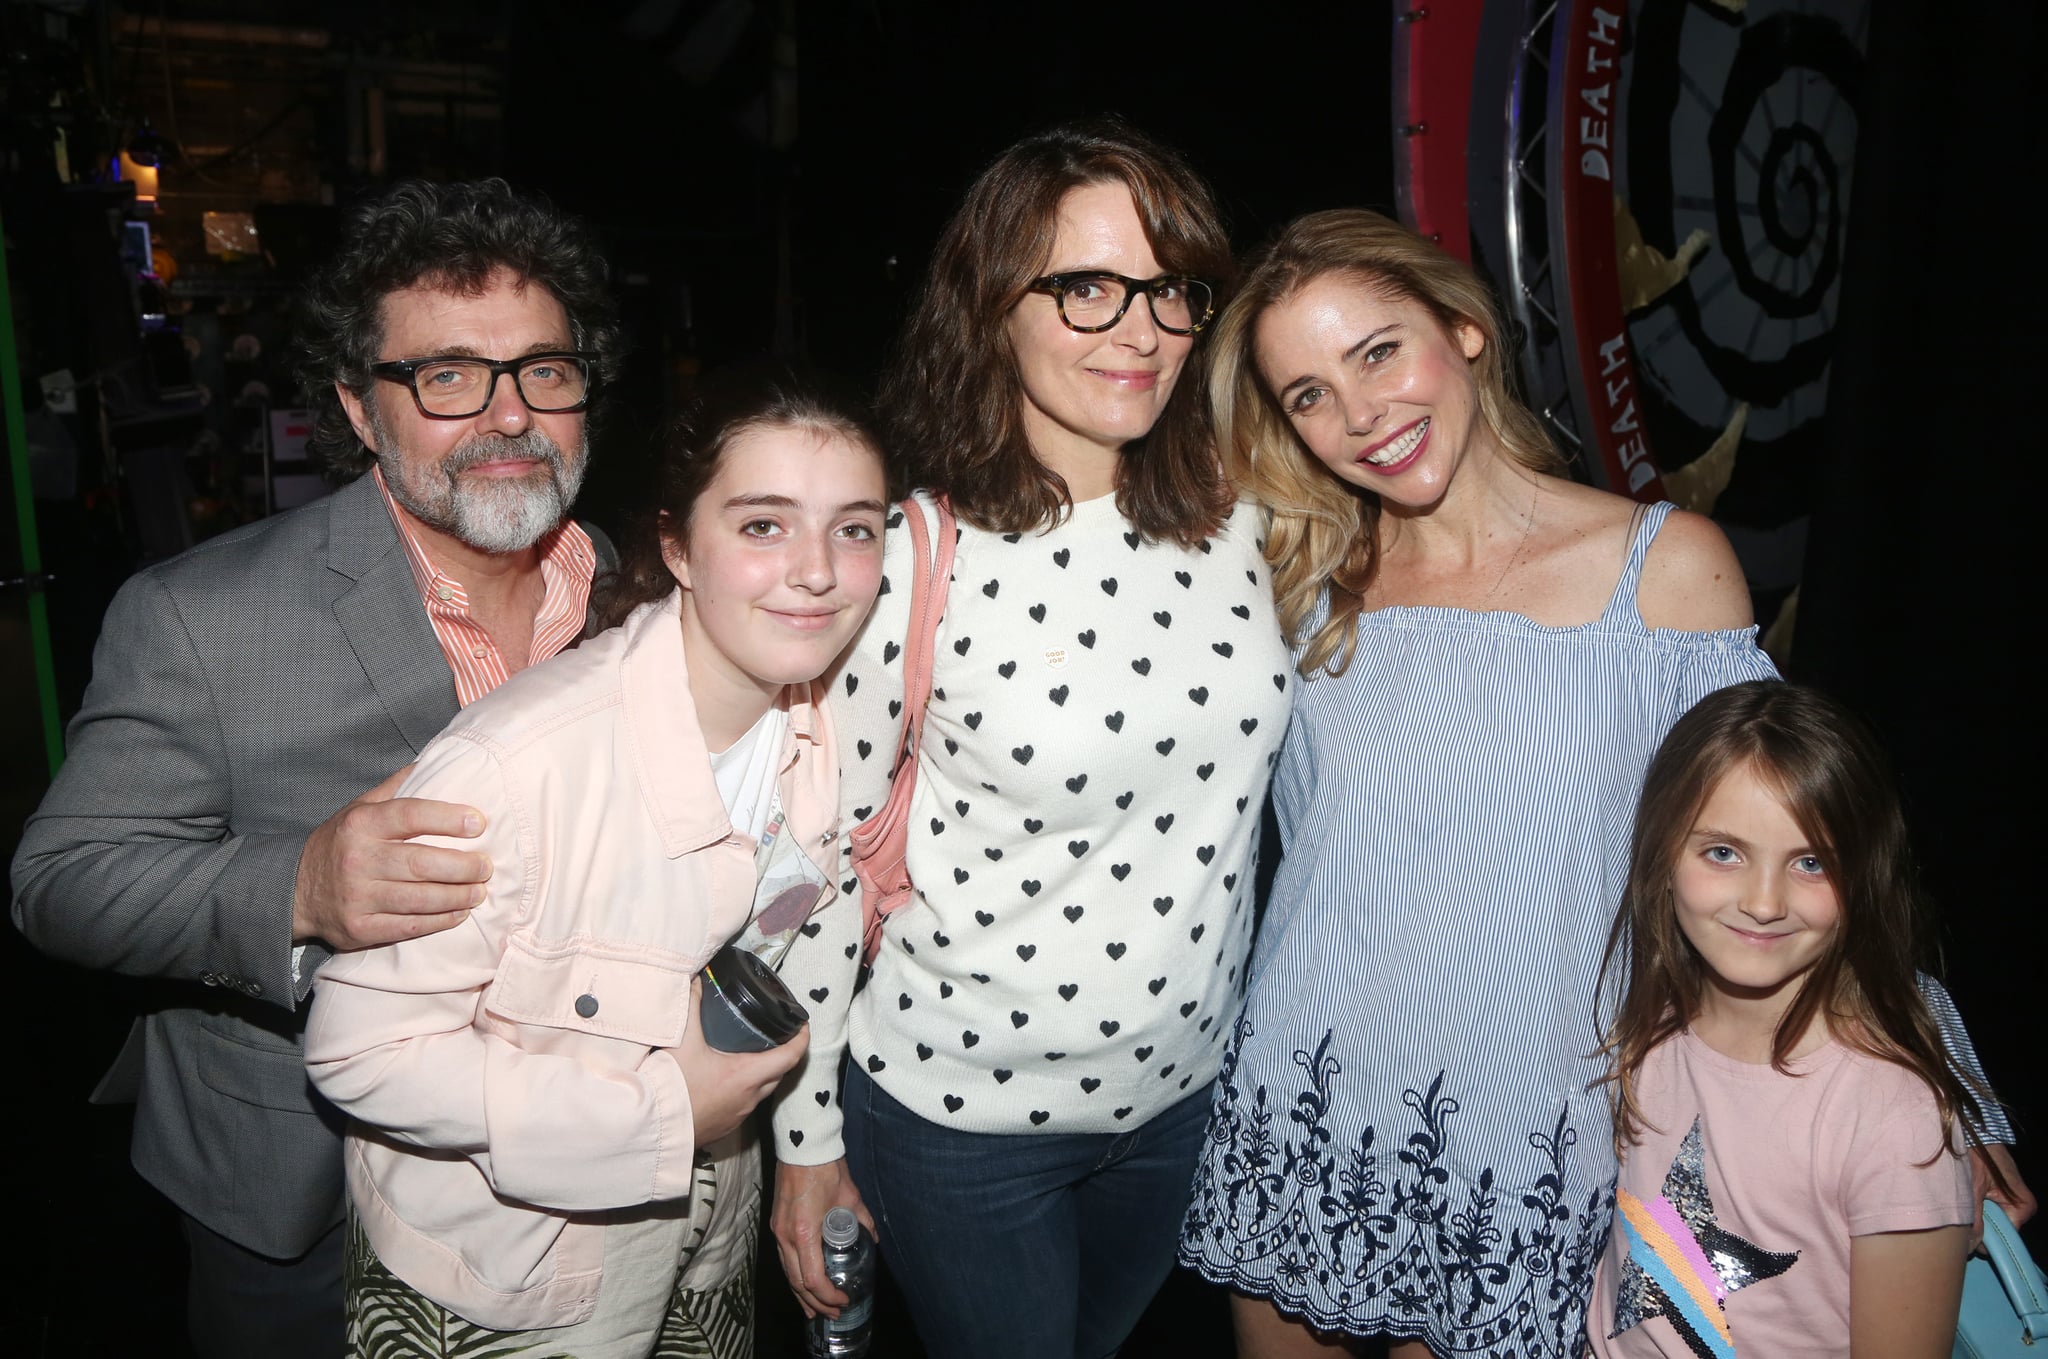 NEW YORK, NY - JUNE 08: (EXCLUSIVE COVERAGE) (L-R) Jeff Richmond, Alice Zenobia Richmond, Tina Fey, Kerry Butler and Penelope Athena Richmond pose backstage at the hit musical based on the film 